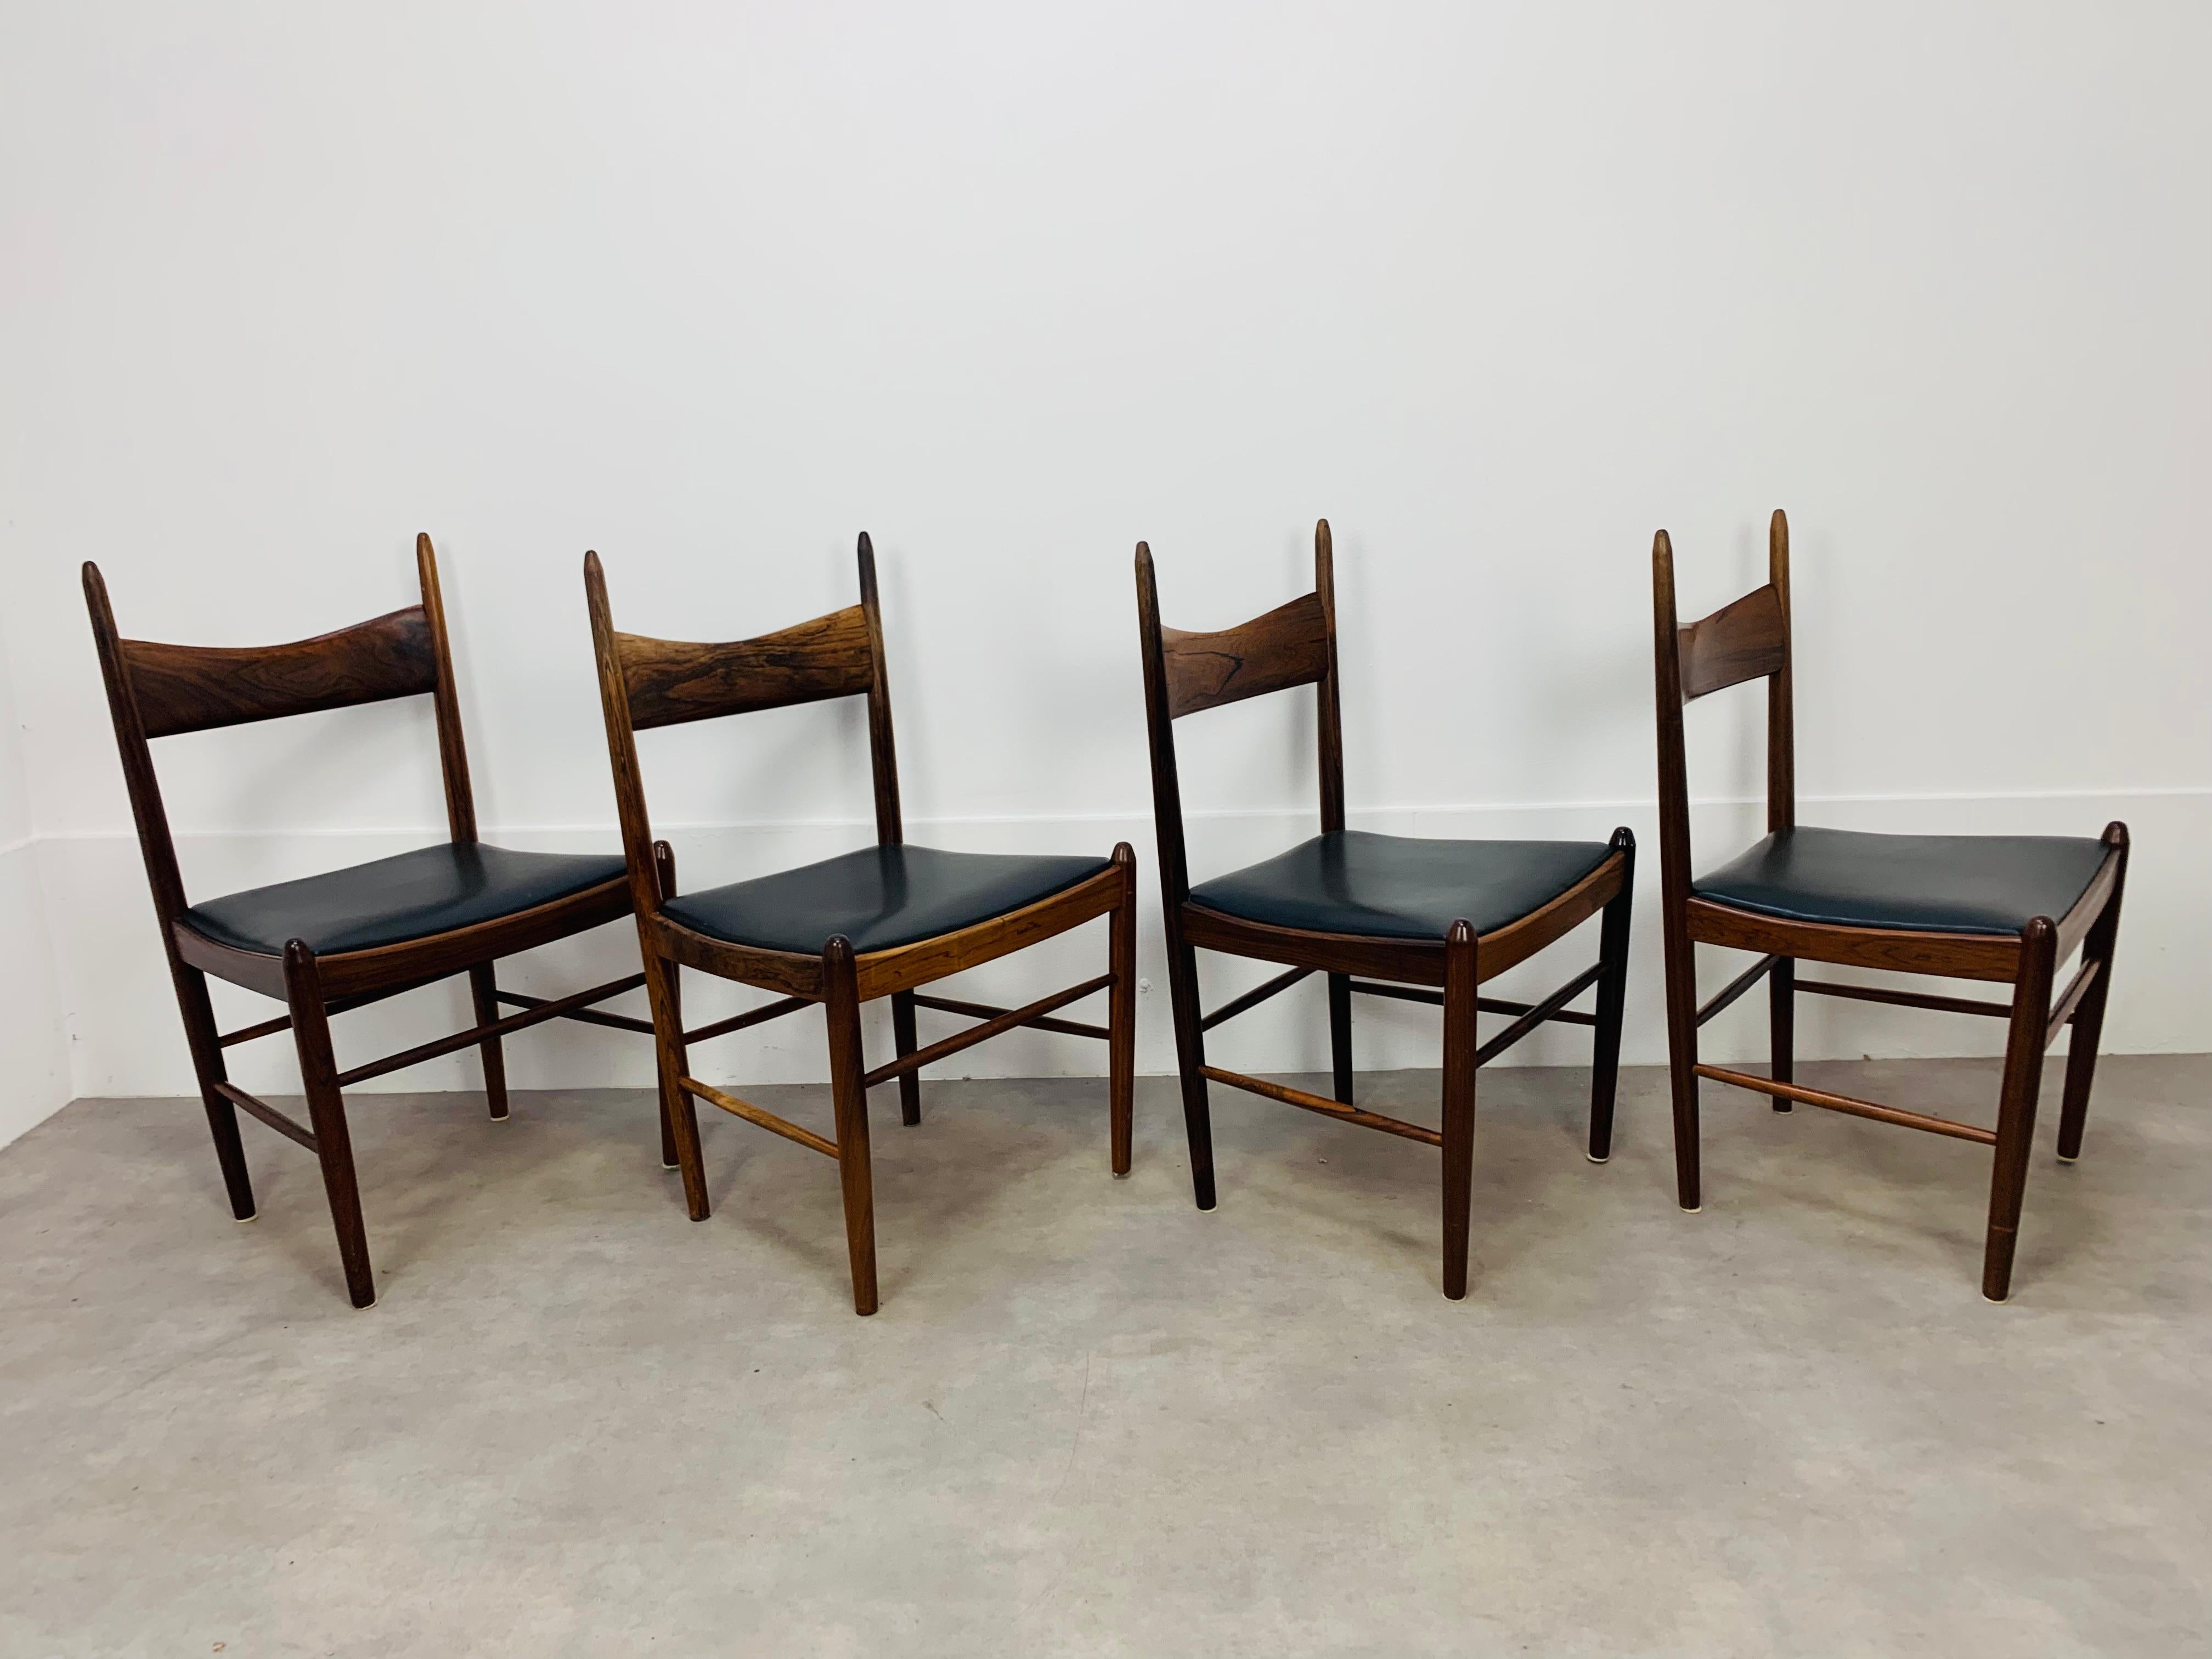 Set of four scandinavian chairs, designed by Vestervig Eriksen for Tomborg Denmark in the 1960's. They're made in beautiful rosewood and black leatherette. They're in very clean condition, the wear is consistent with age and use, there is a slight